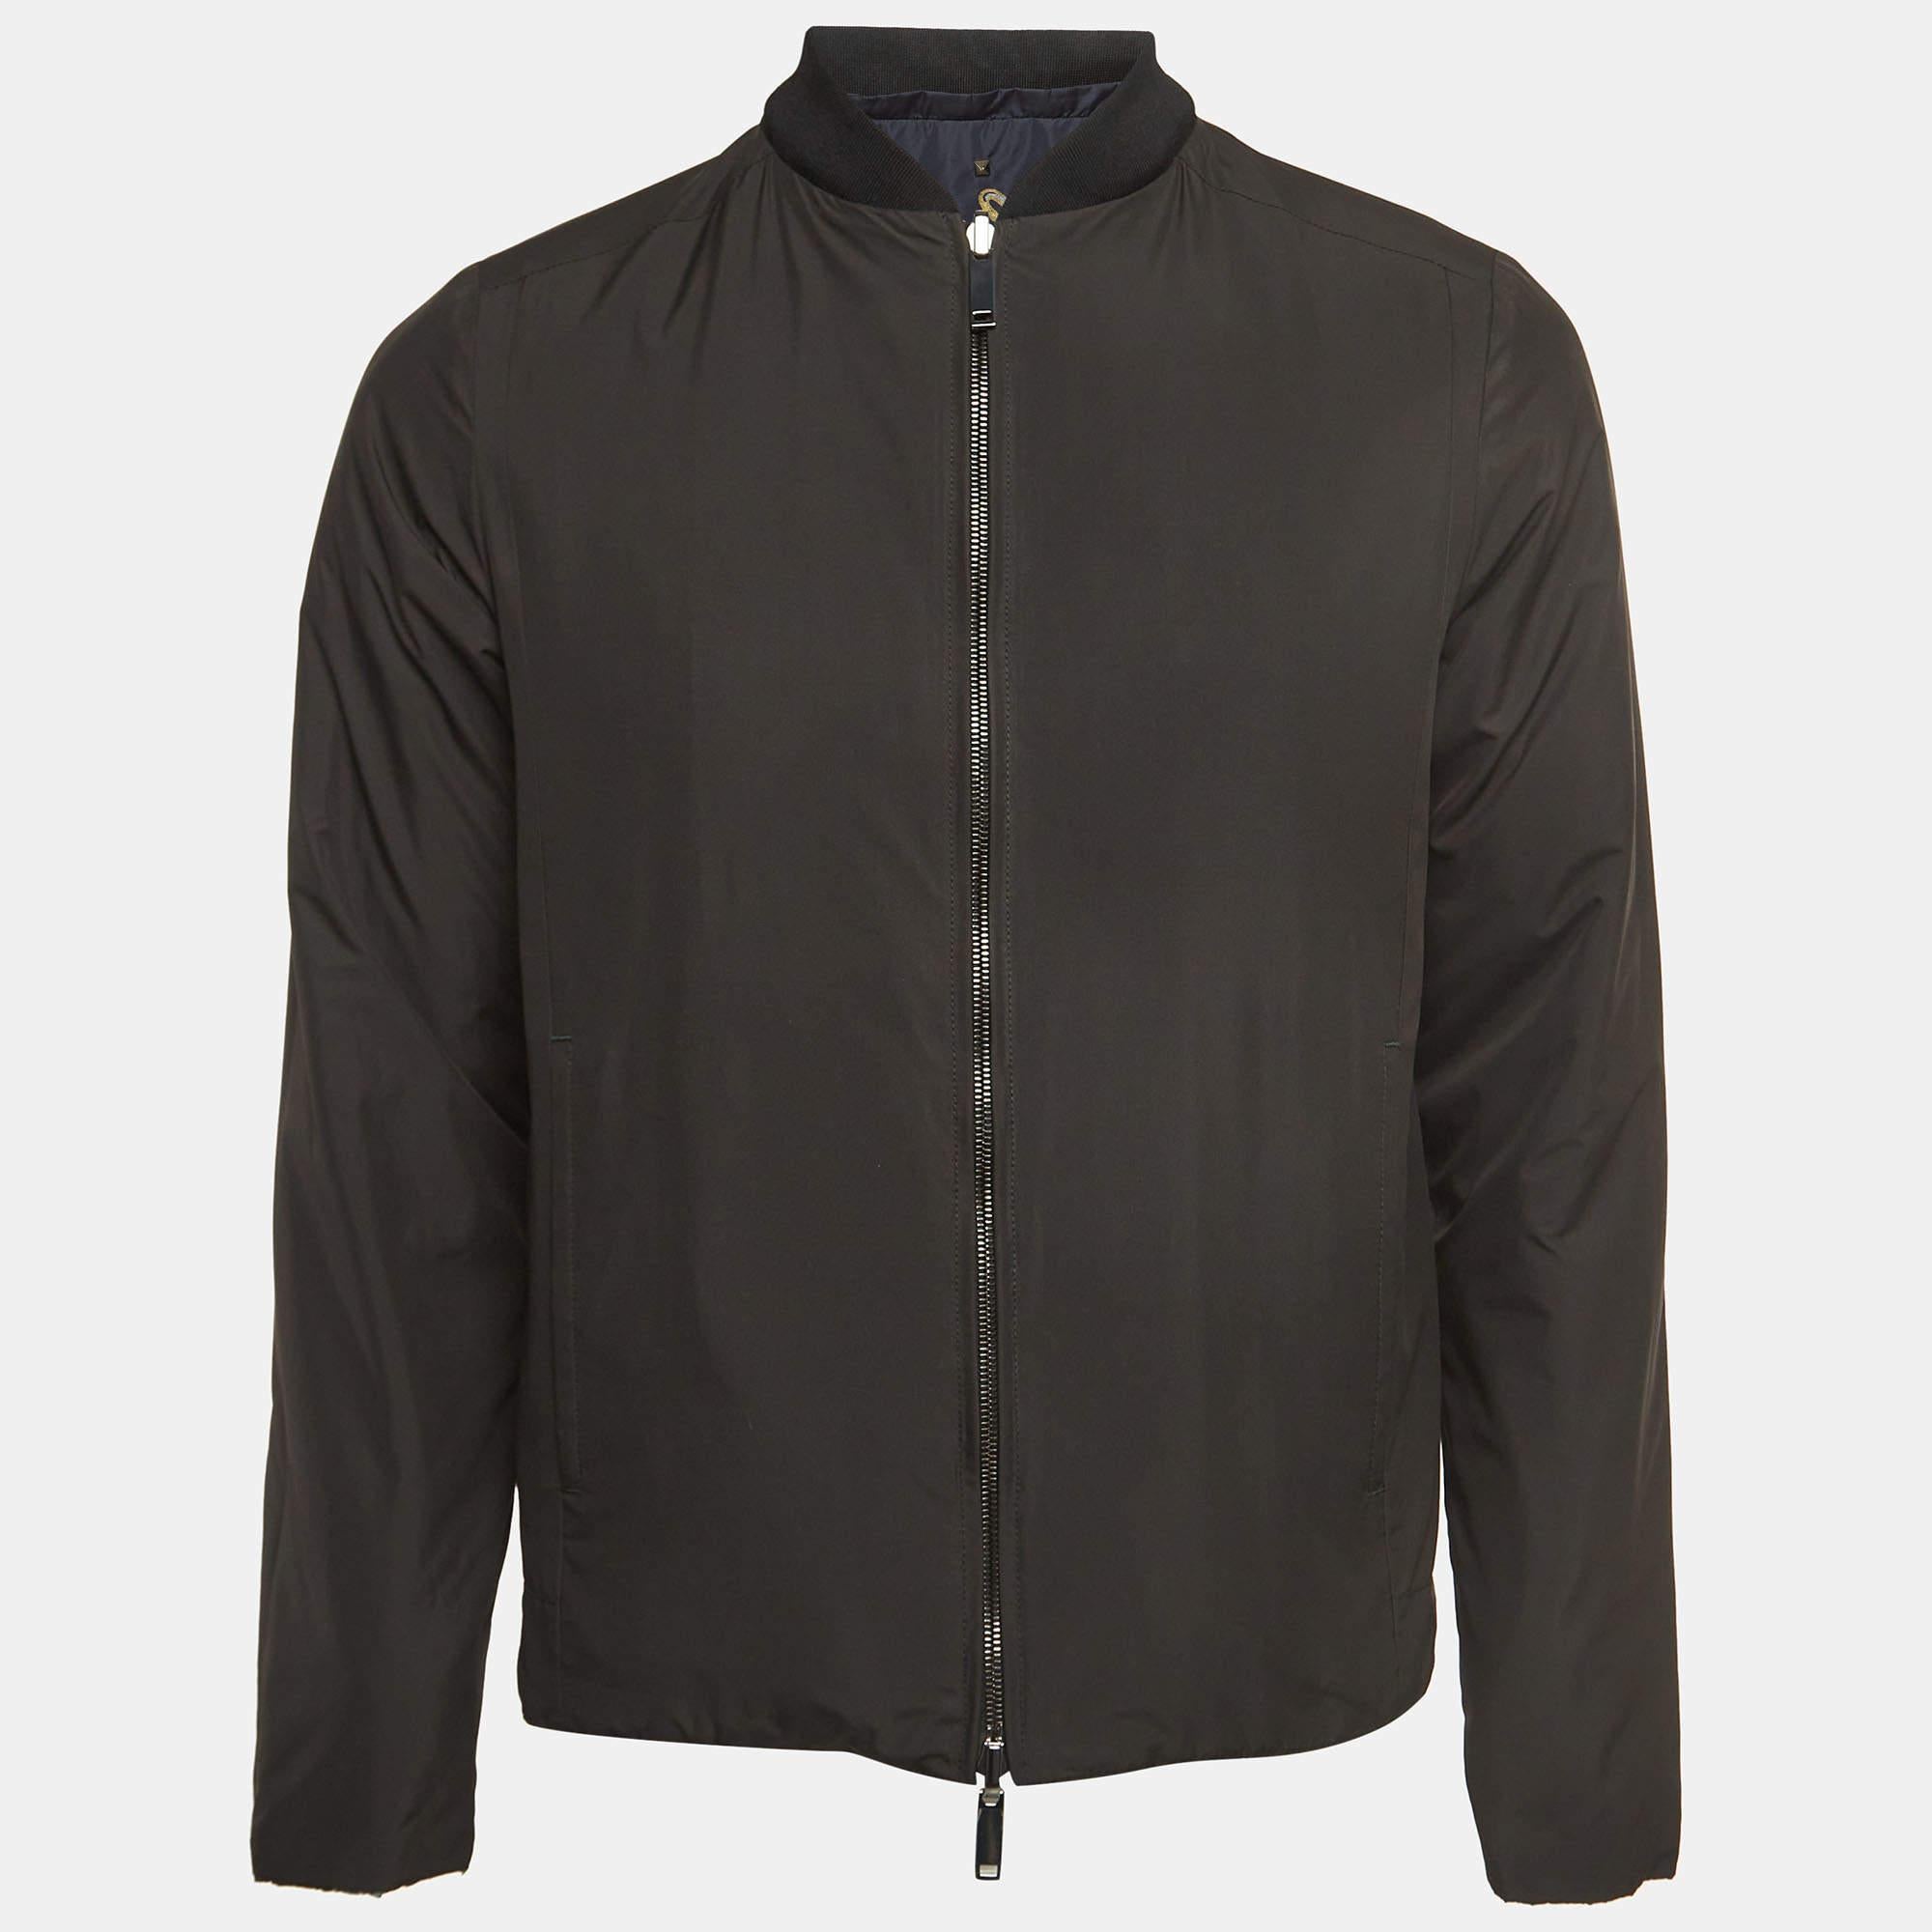 An elegant silhouette, smart fit, and perfect tailoring make this Valentino men's jacket a fine choice. It is made of quality materials, secured with front zip closure, and added with four pockets.

